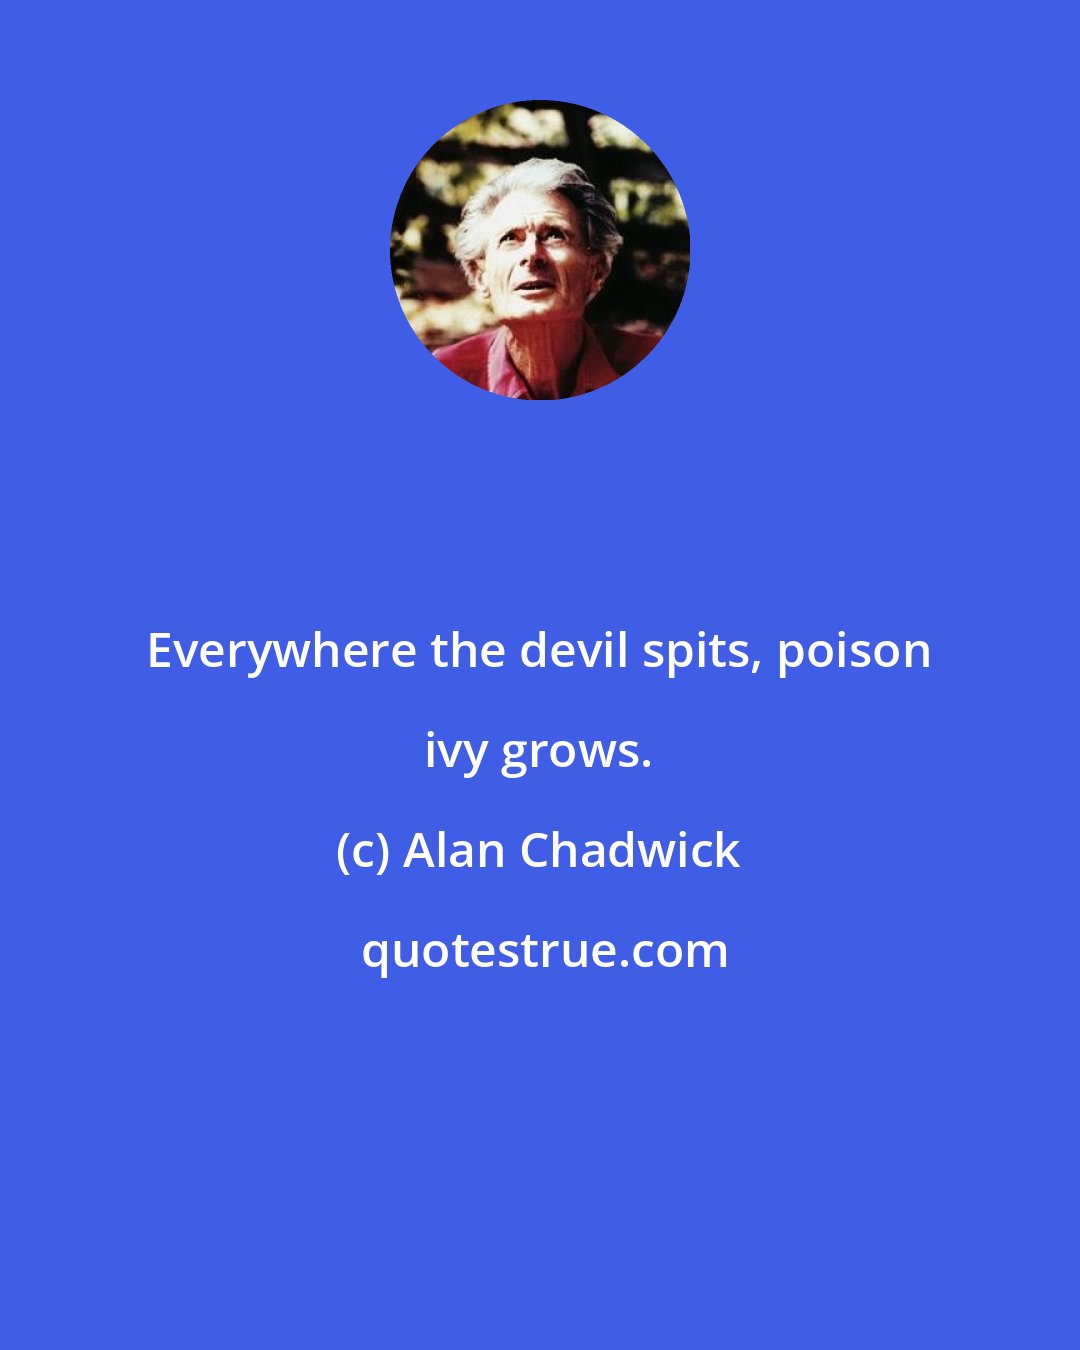 Alan Chadwick: Everywhere the devil spits, poison ivy grows.